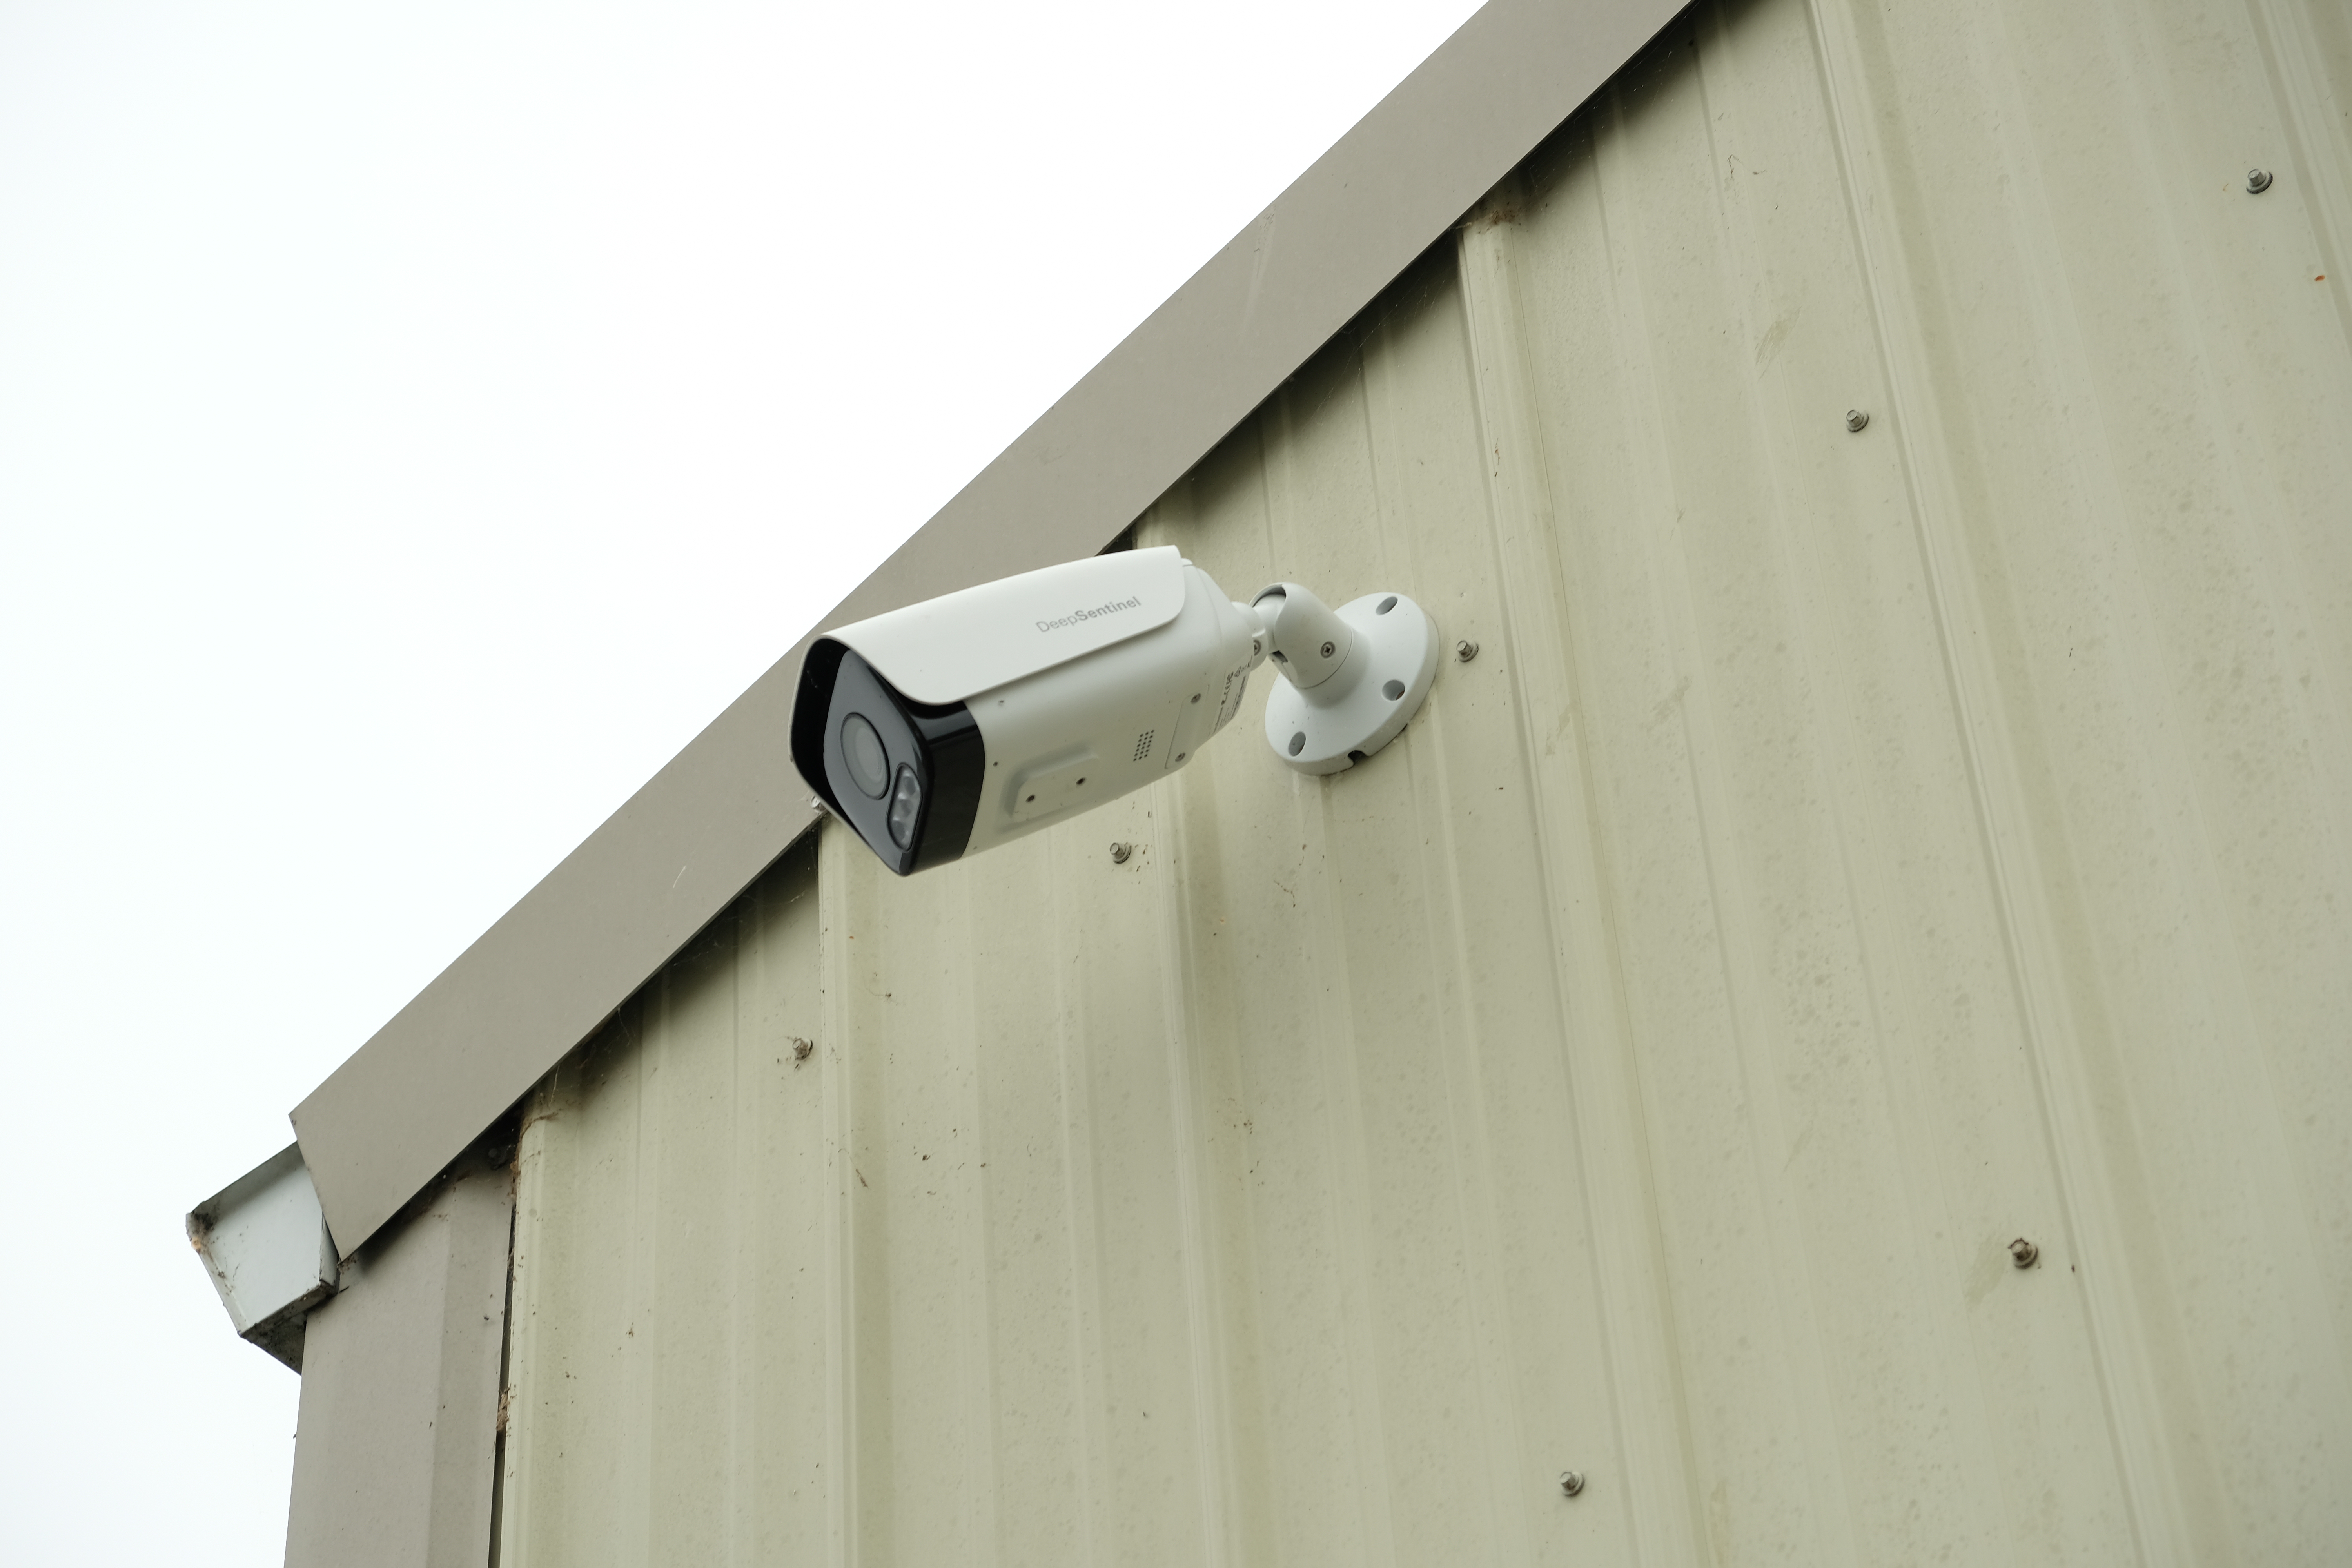 Security Cameras and Live Guard Services